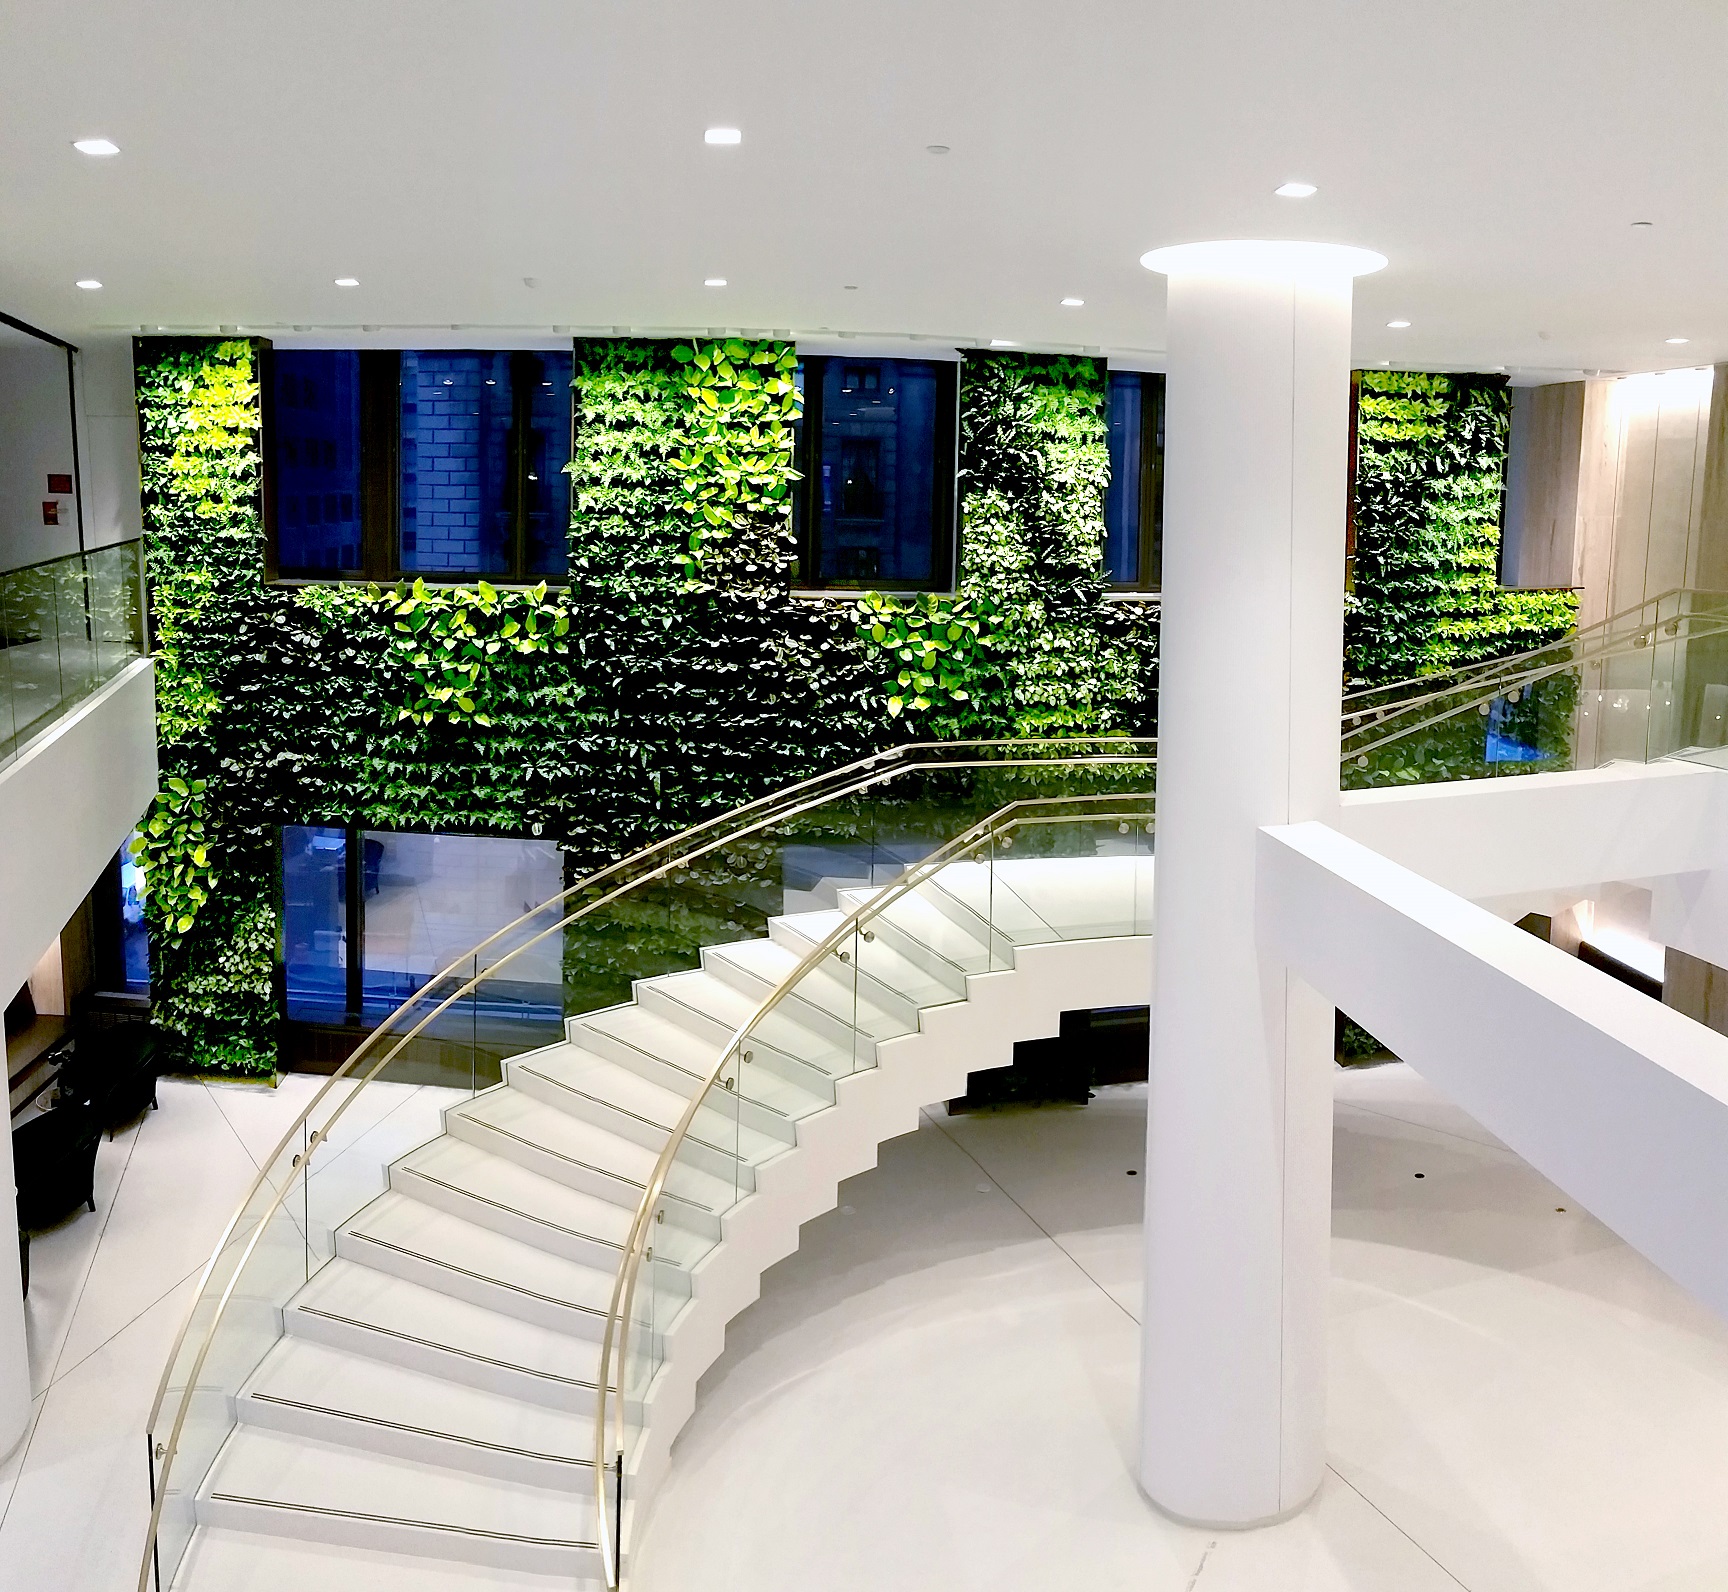 The juxtaposition of organic and rectilinear form of this living wall creates a dynamic backdrop for the centralized atrium and